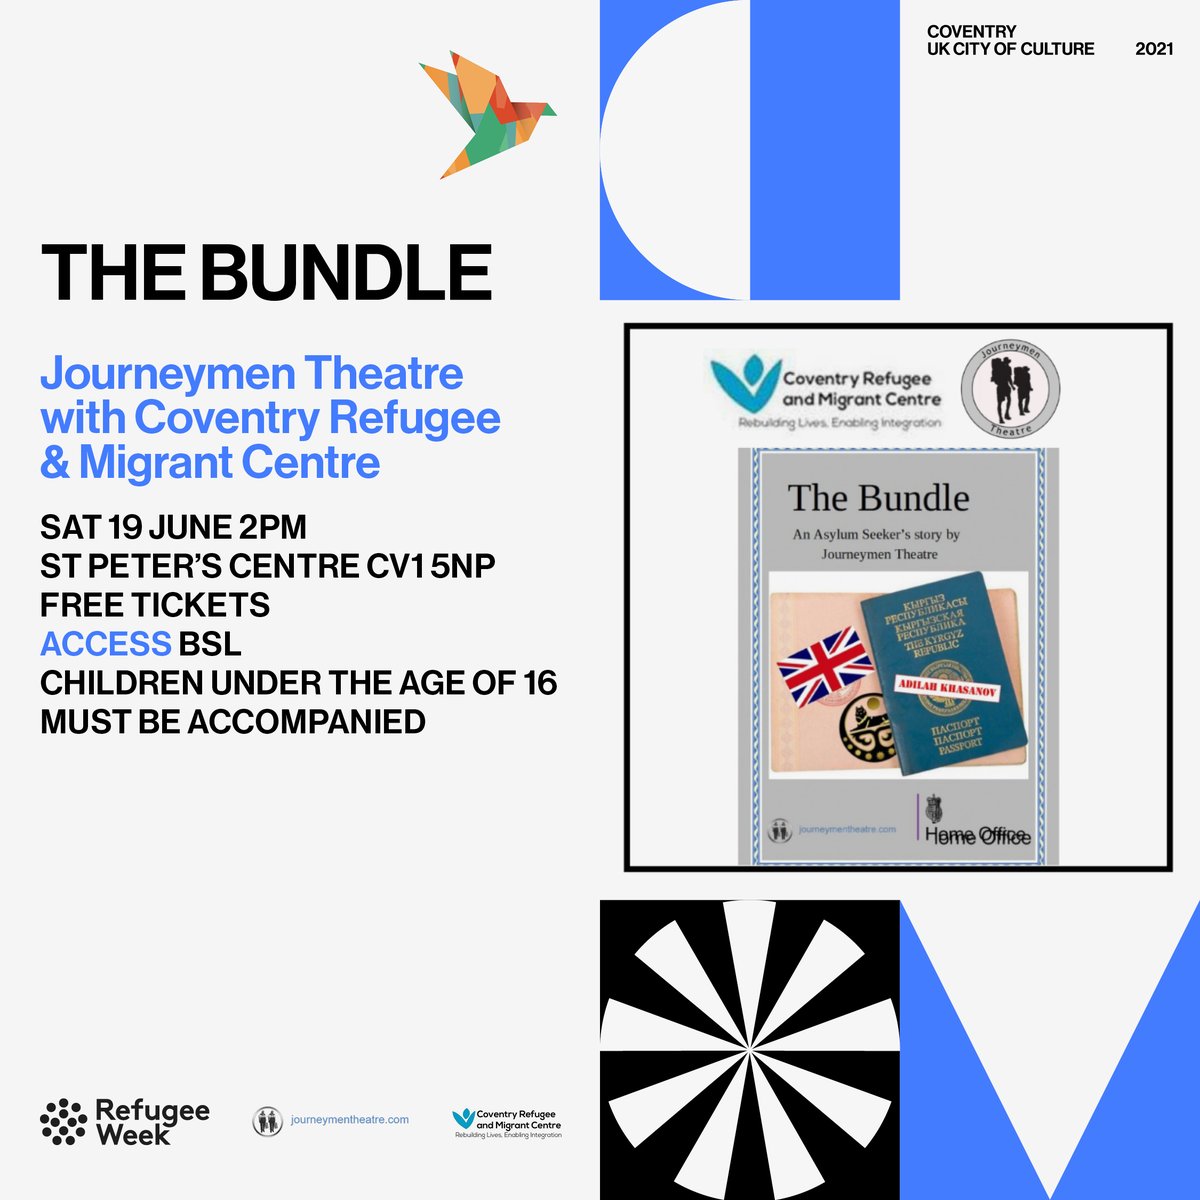 the bundle by Journeymen Theatre Coventry Refugee and Migrant Centre starts at 2pm !!! on Saturday